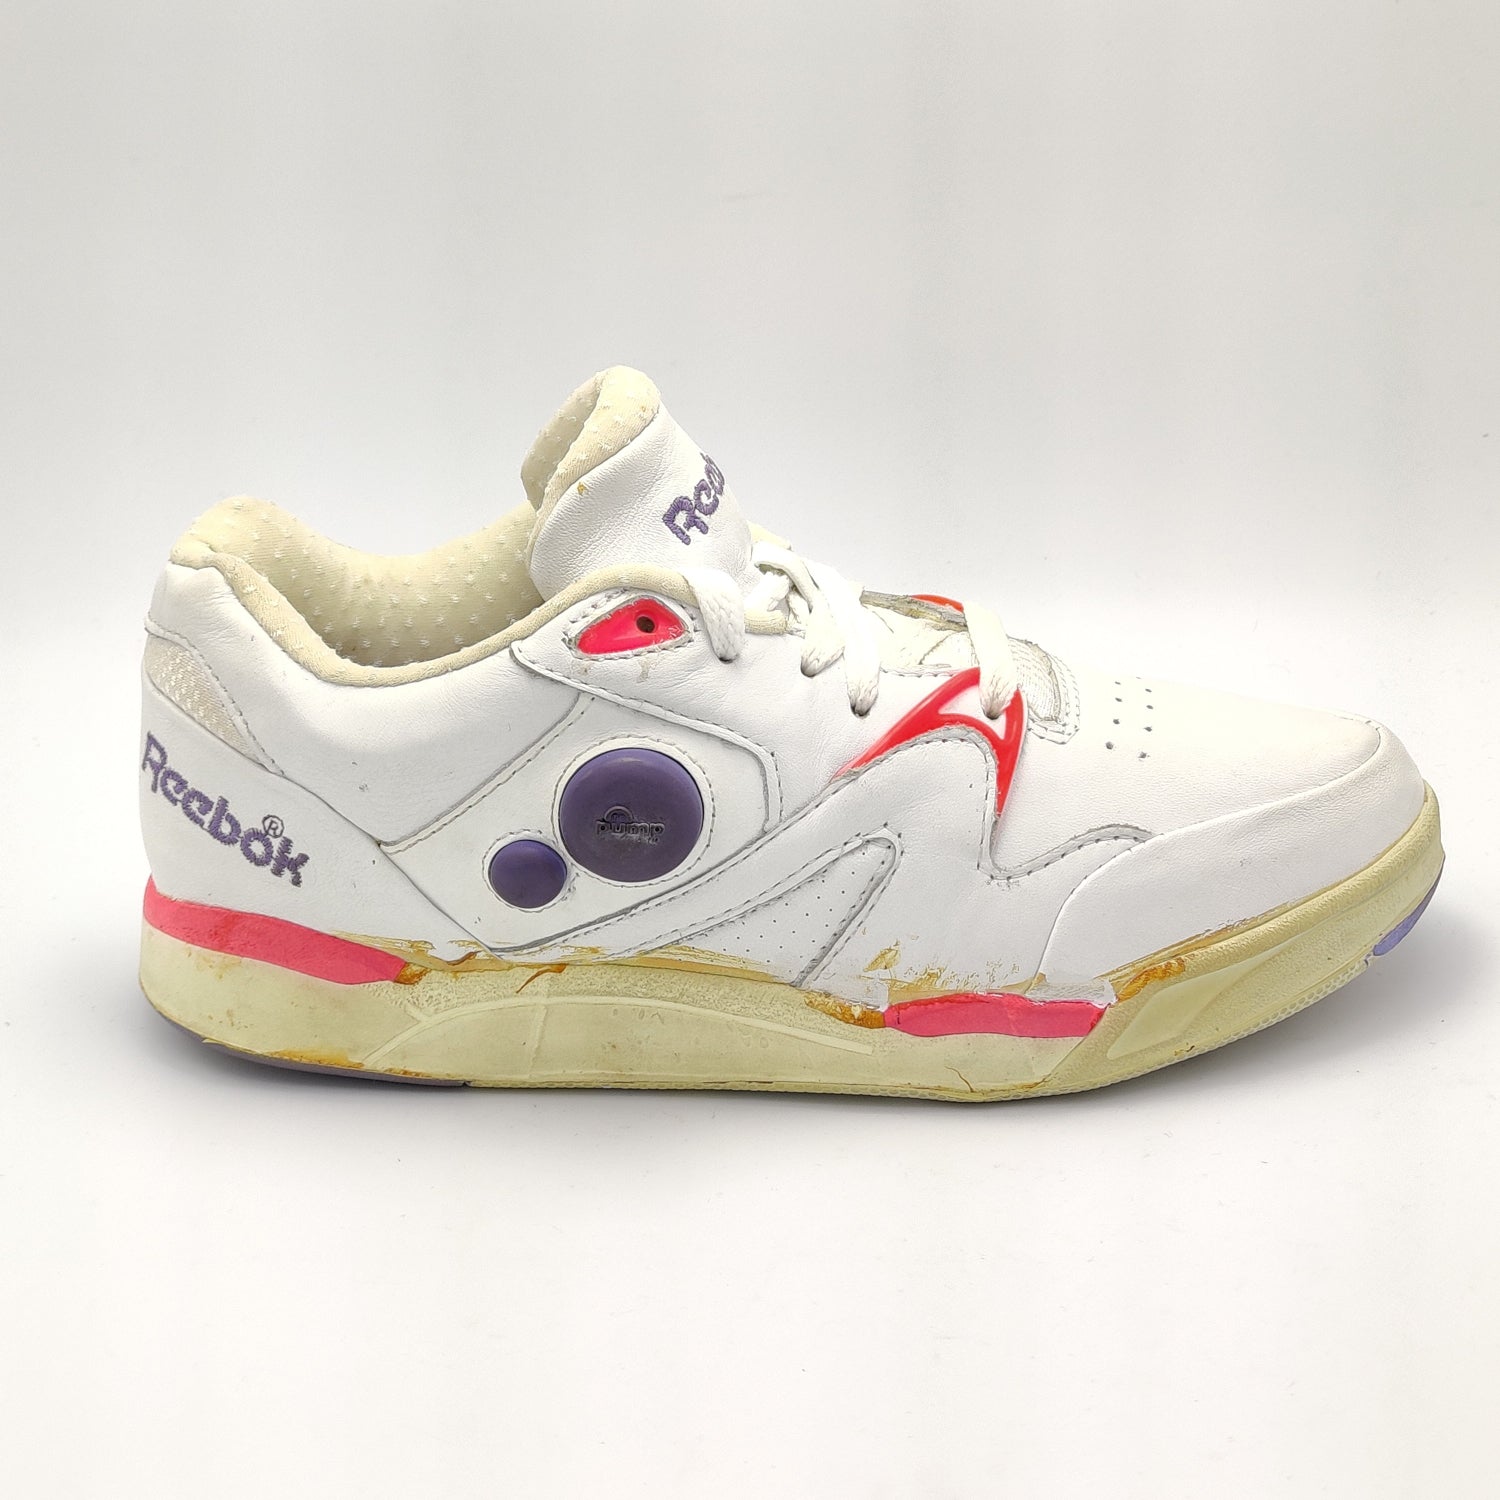 Reebok Womens Pump Low Trainers - See Photos Sutton Sports